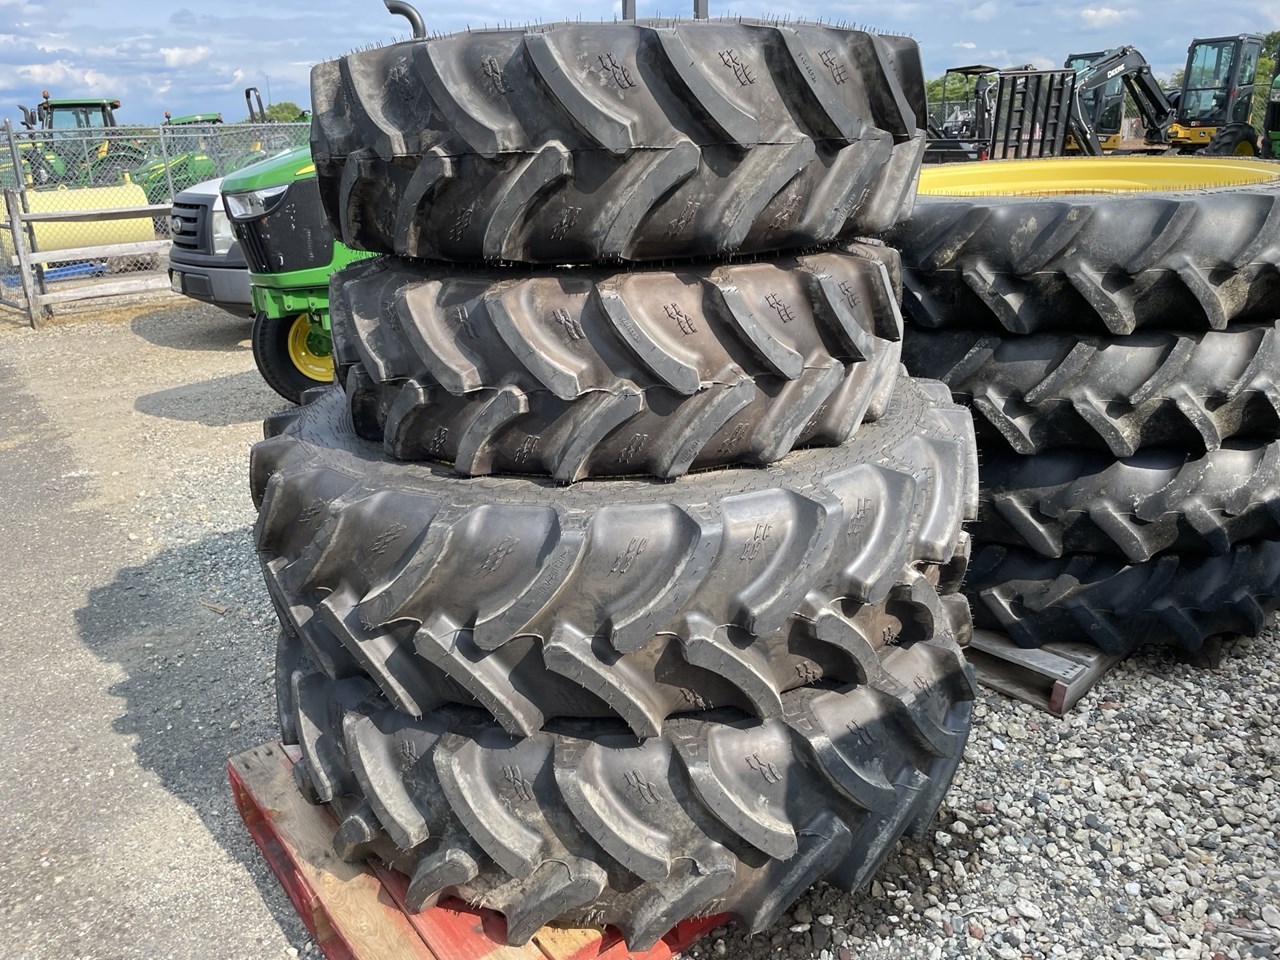 John Deere Set of 400/75R38 and 340/85R24 Tires and Tracks For Sale